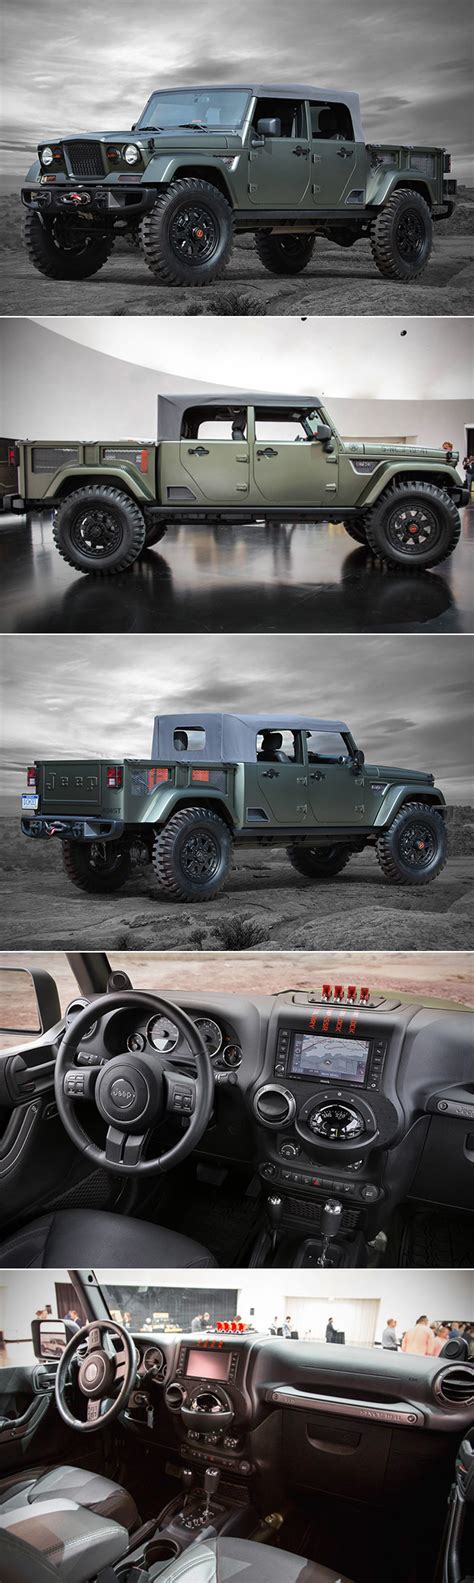 When Military Vehicle Meets Wrangler Unlimited You Get The Sleek Jeep